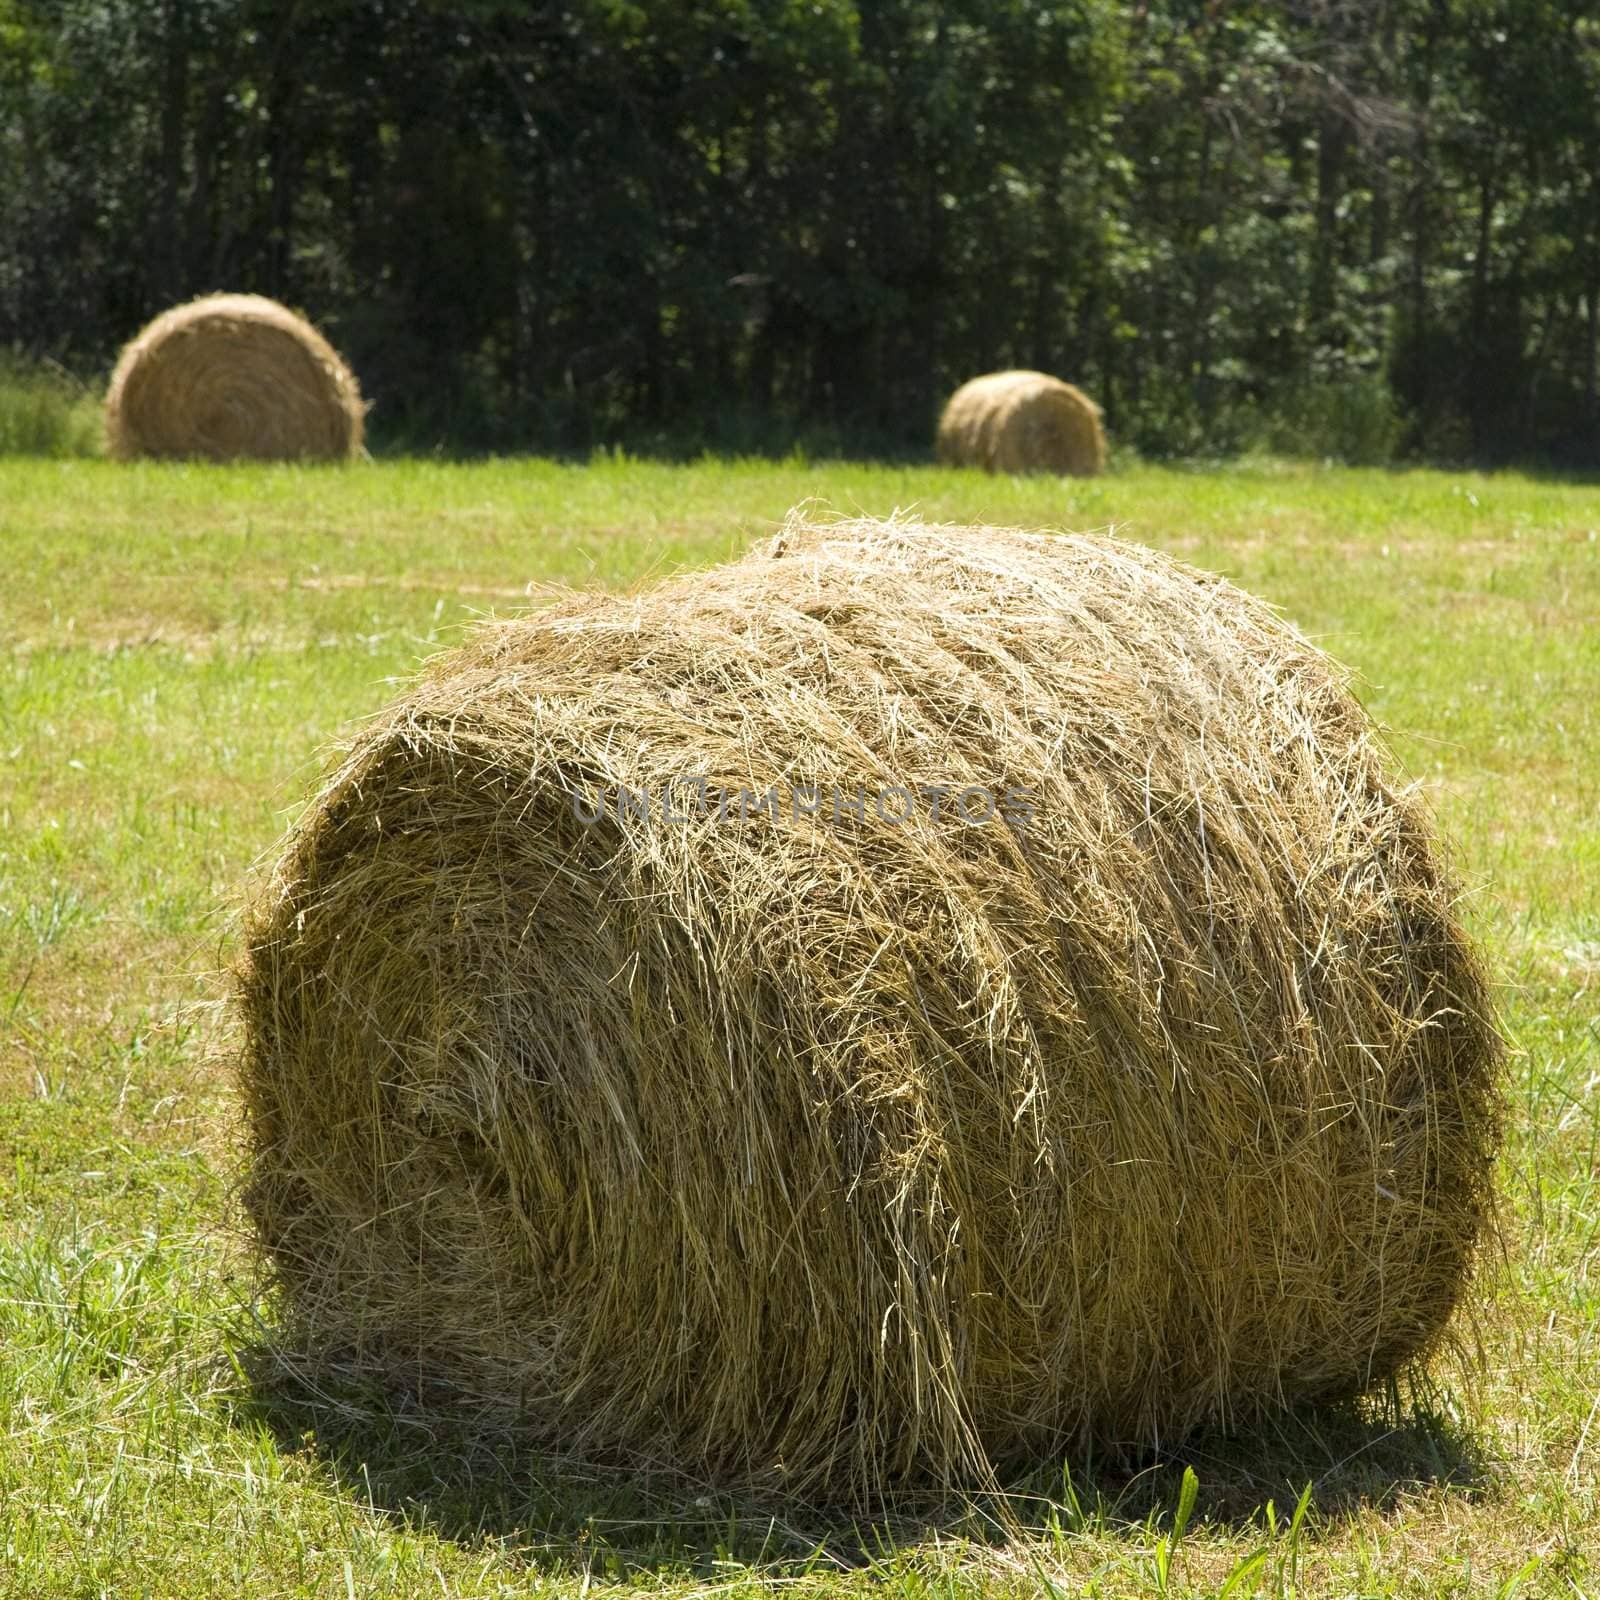 Hay bale in field with others in background.